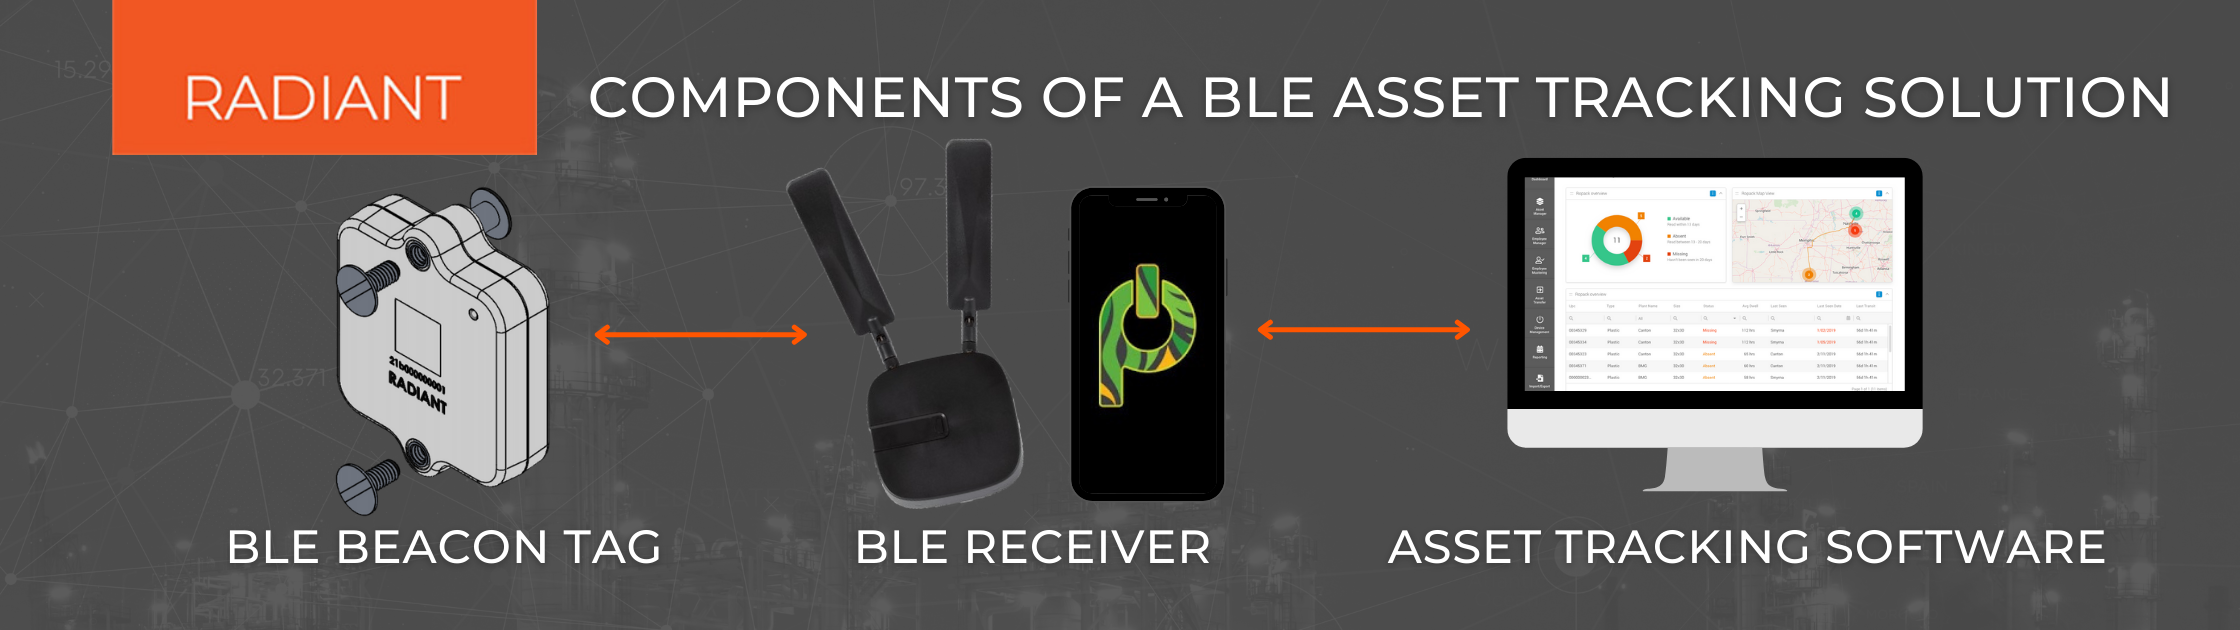 BLE Asset Tracking System - Bluetooth Low Energy Asset Tracking - BLE Asset Tracking - Bluetooth Low Energy Tracking - Bluetooth Asset Tracking - BLE Based Indoor Asset Tracking - Bluetooth Low Energy Tracking